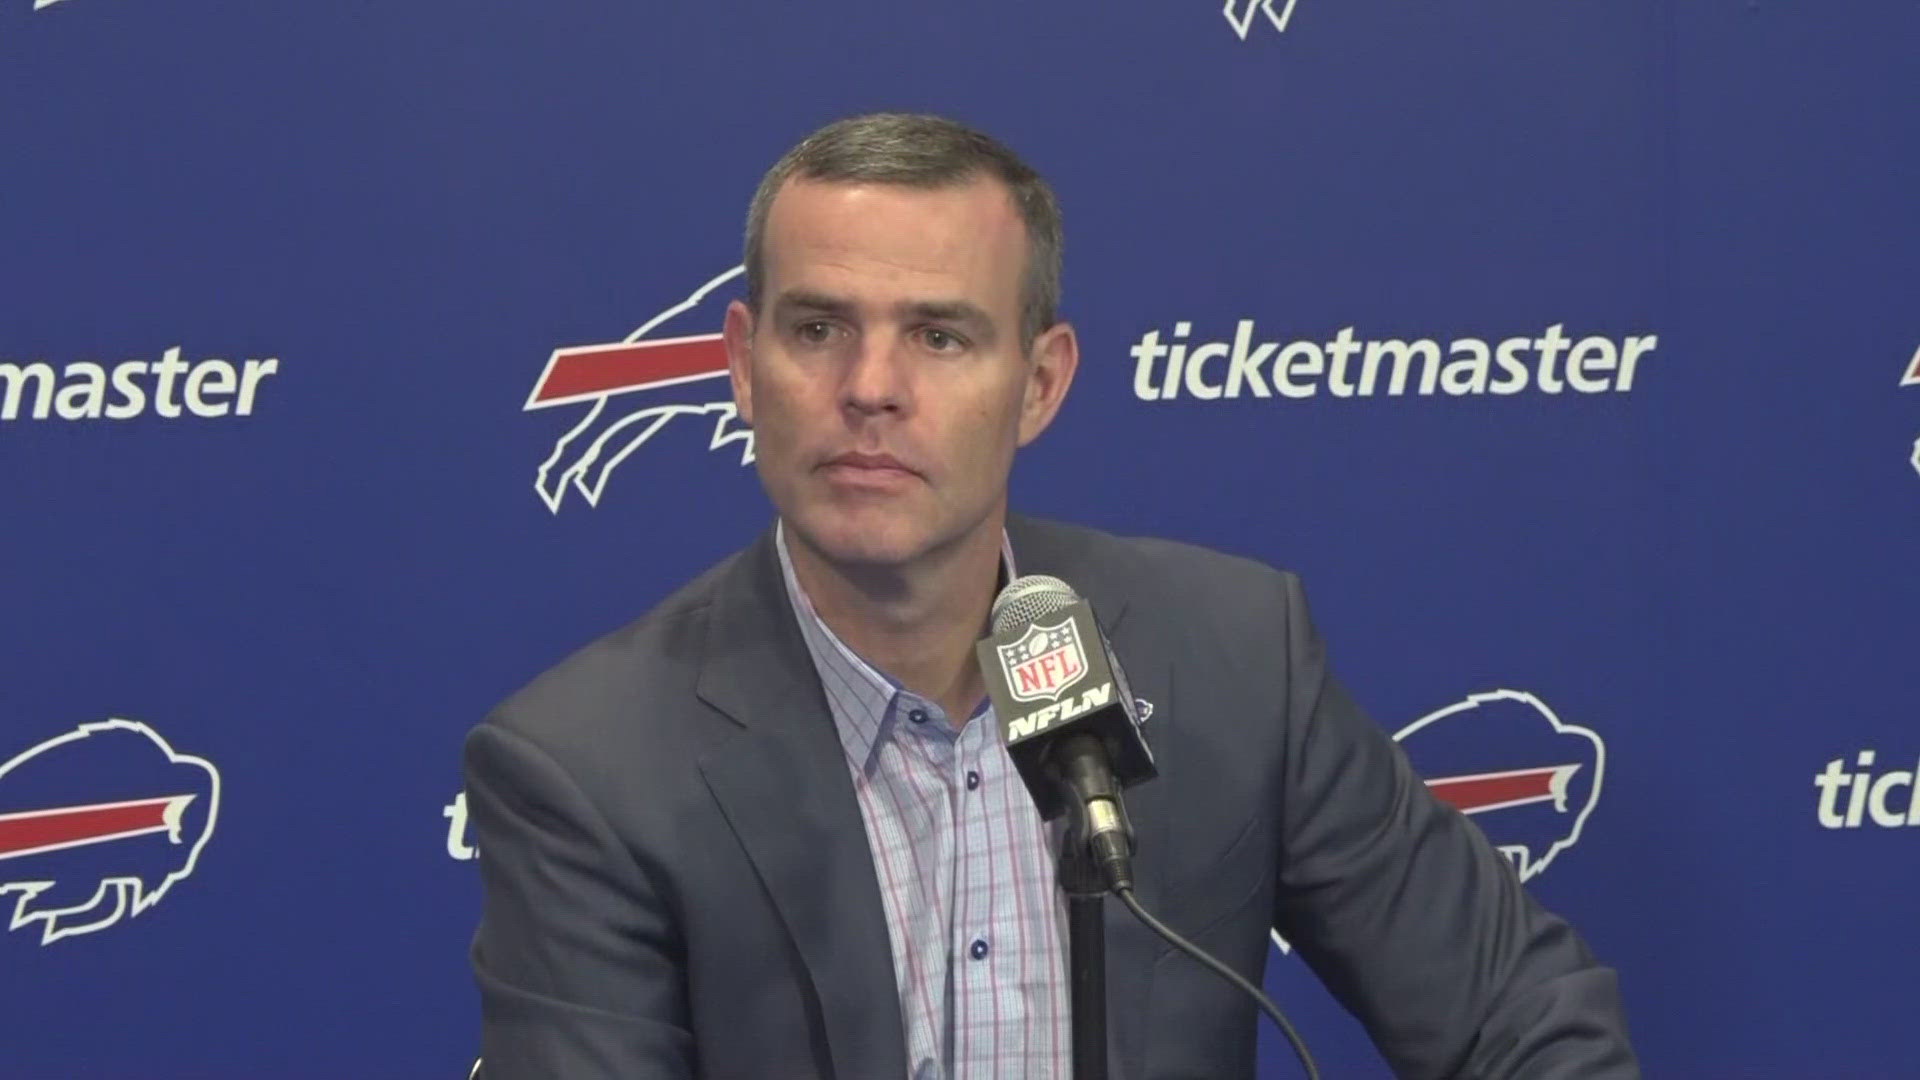 NFL Draft: Bills GM Brandon Beane discusses Day 2, which included 3 picks.